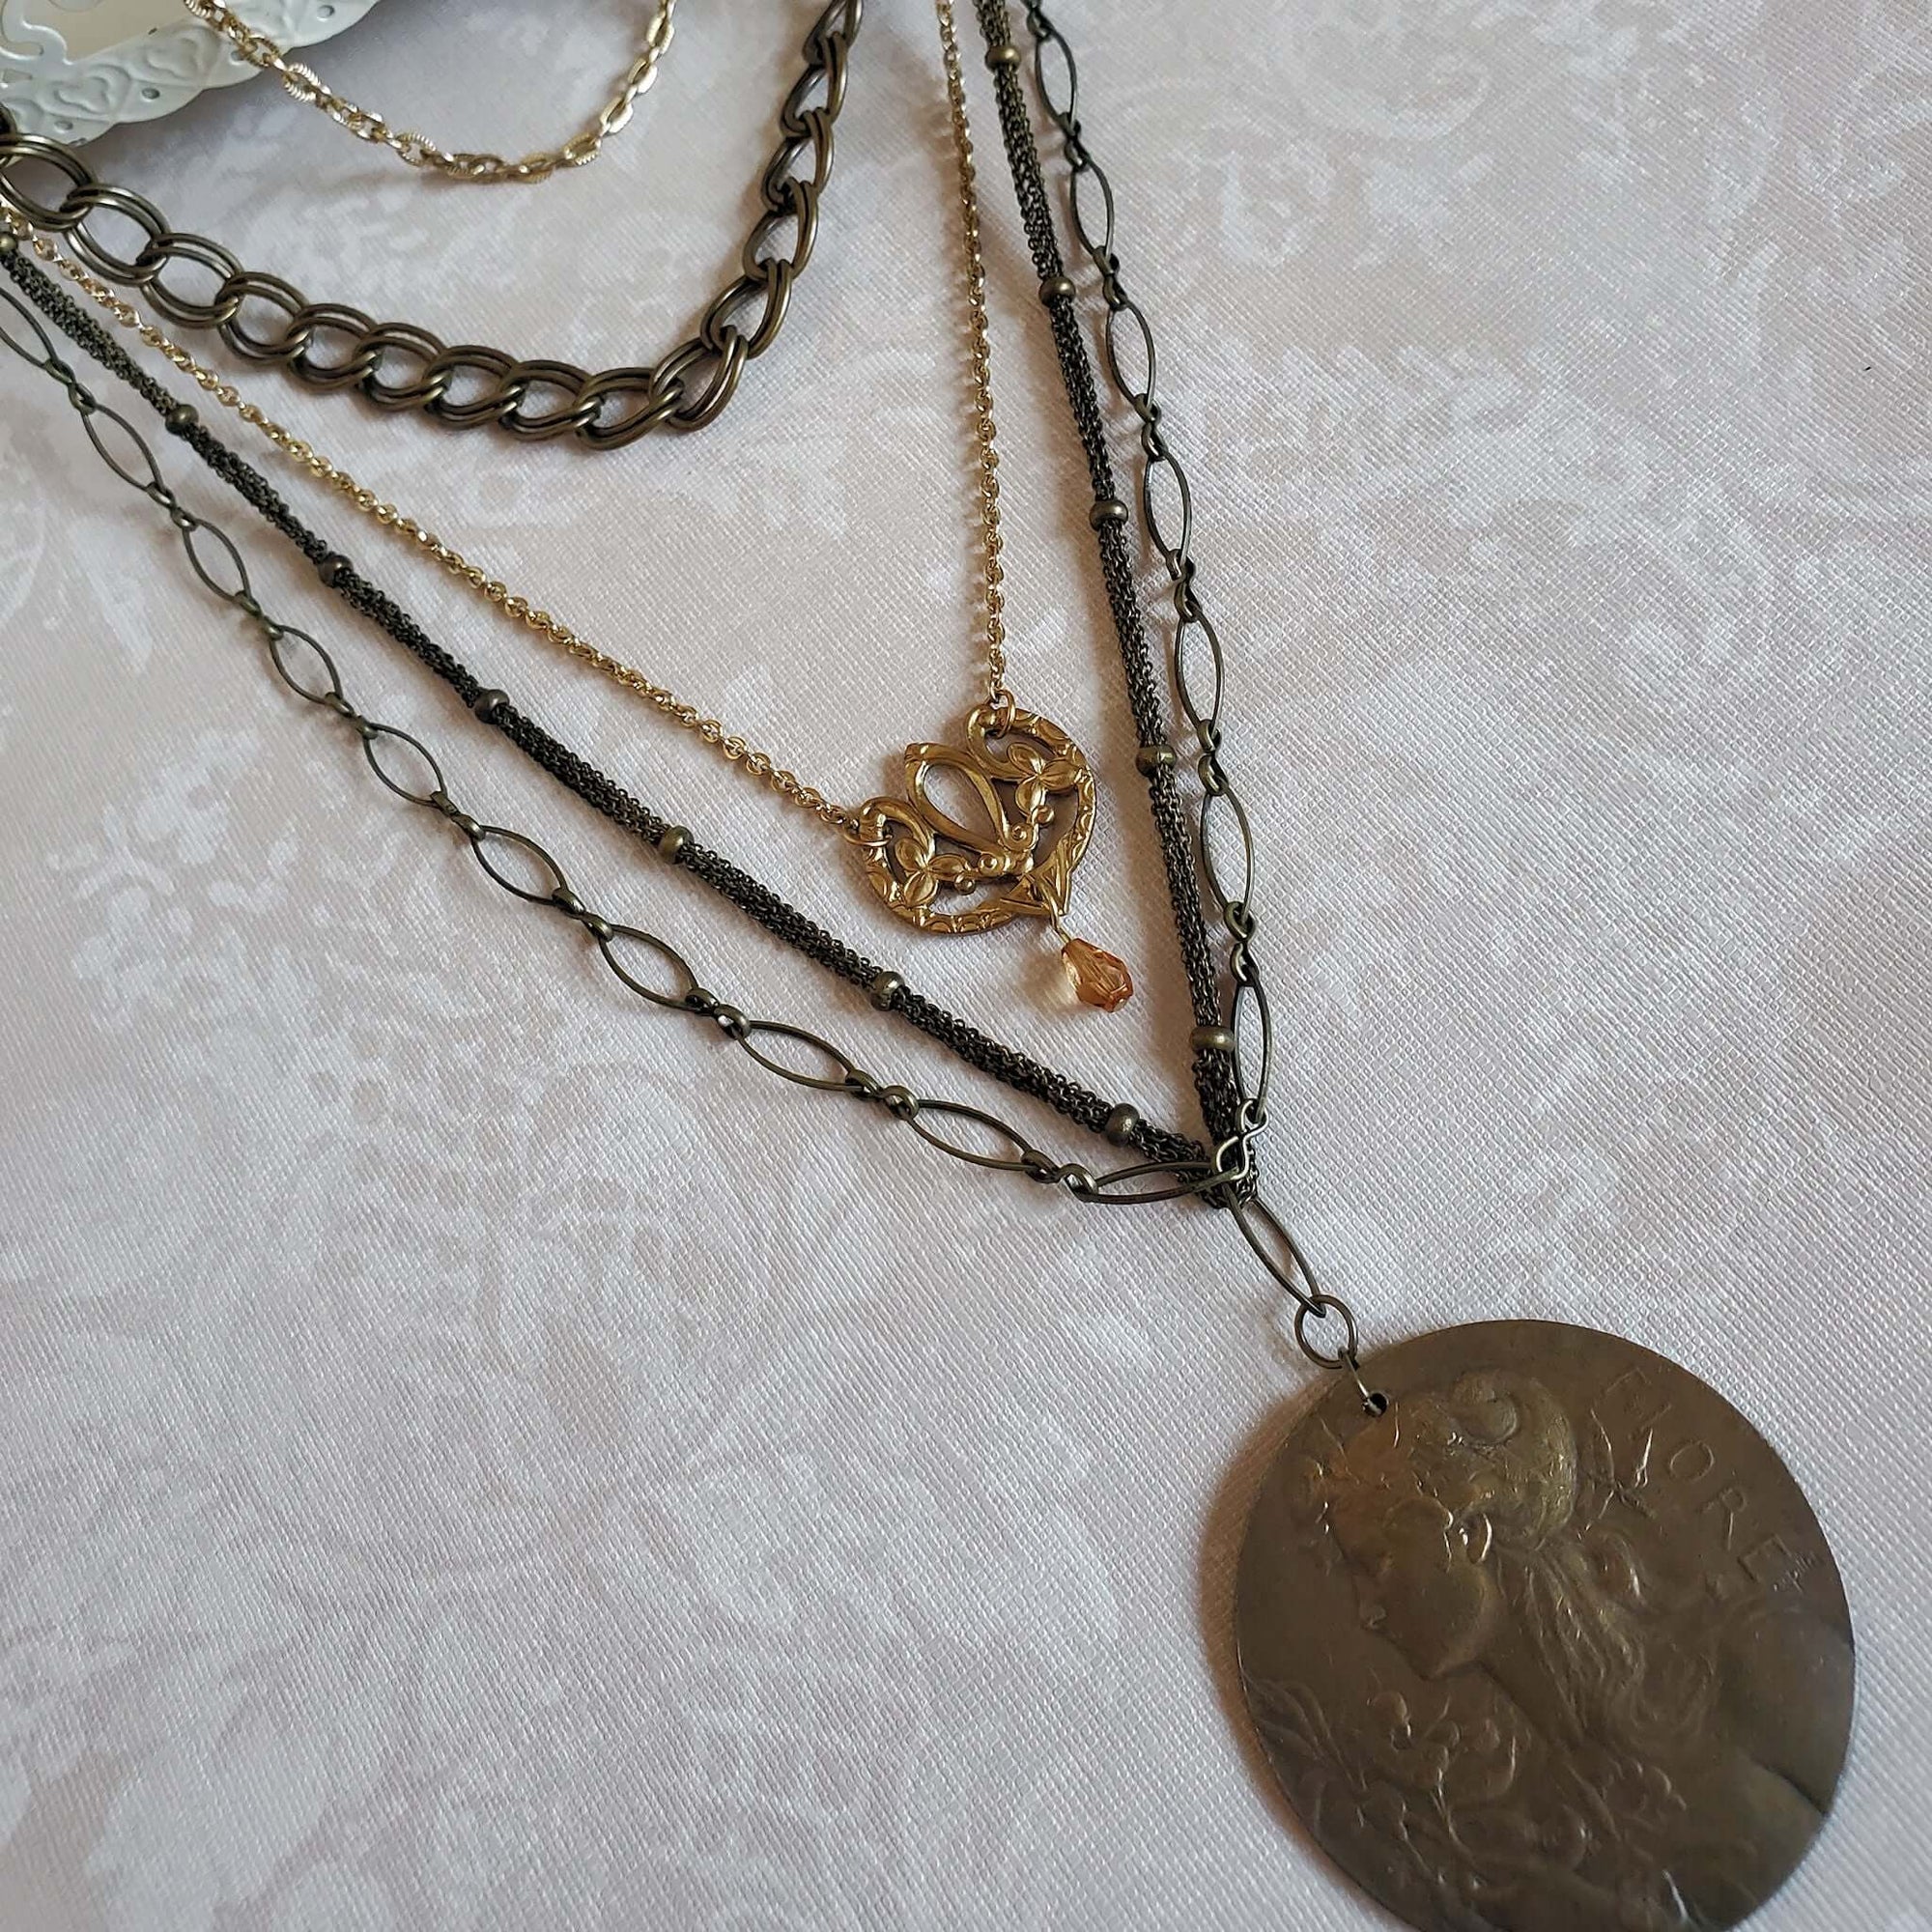 Dual Pendant Necklace with Brass Charm and Goddess Medallion